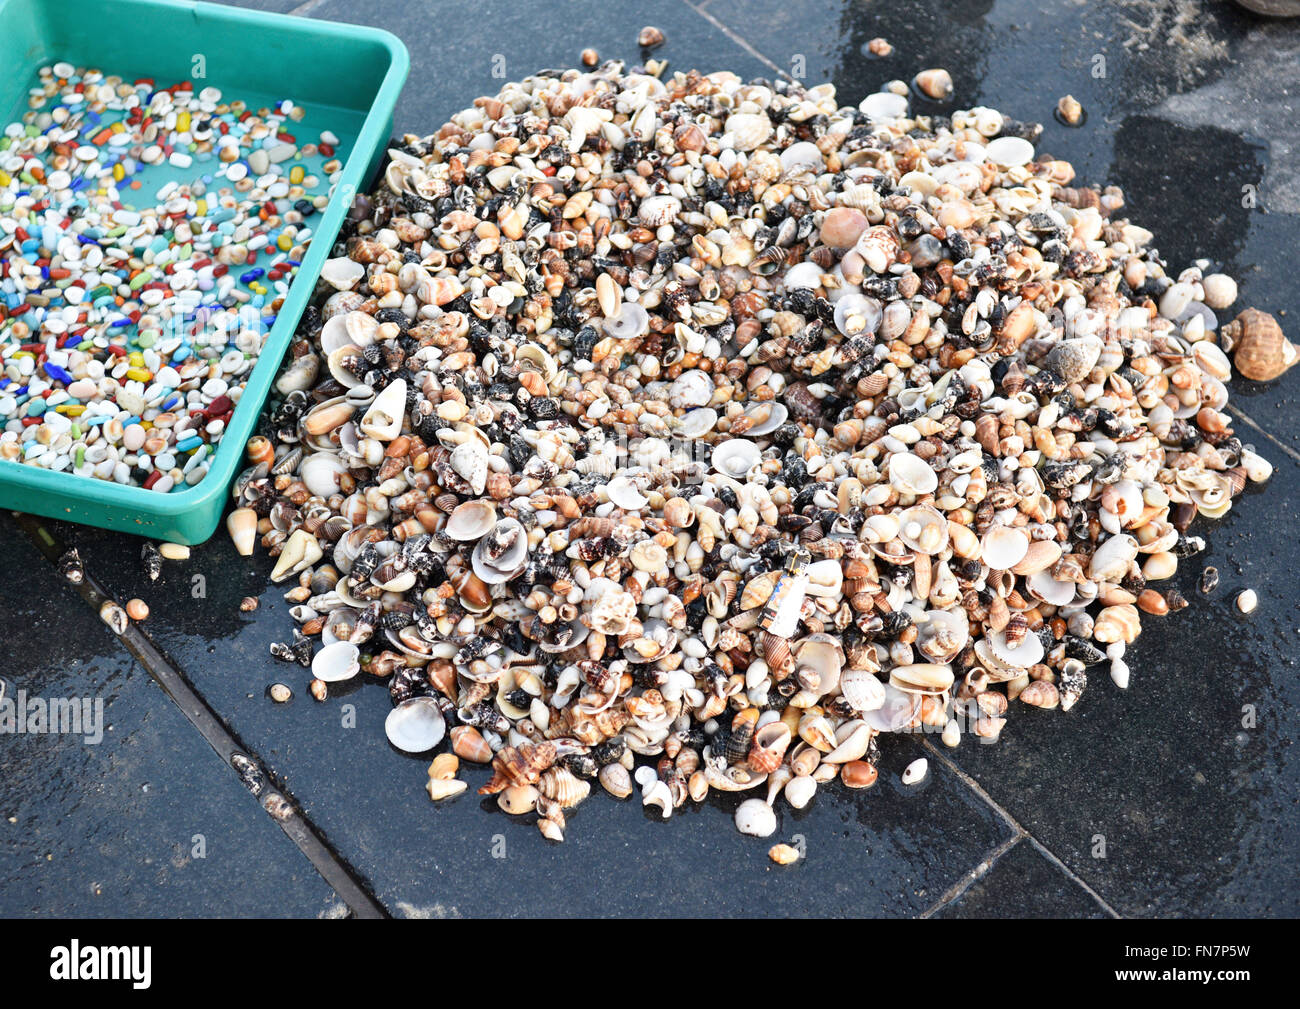 Display of variety of seashells, colored stones, gemstones, and gold collected from seabeds and beaches. Stock Photo